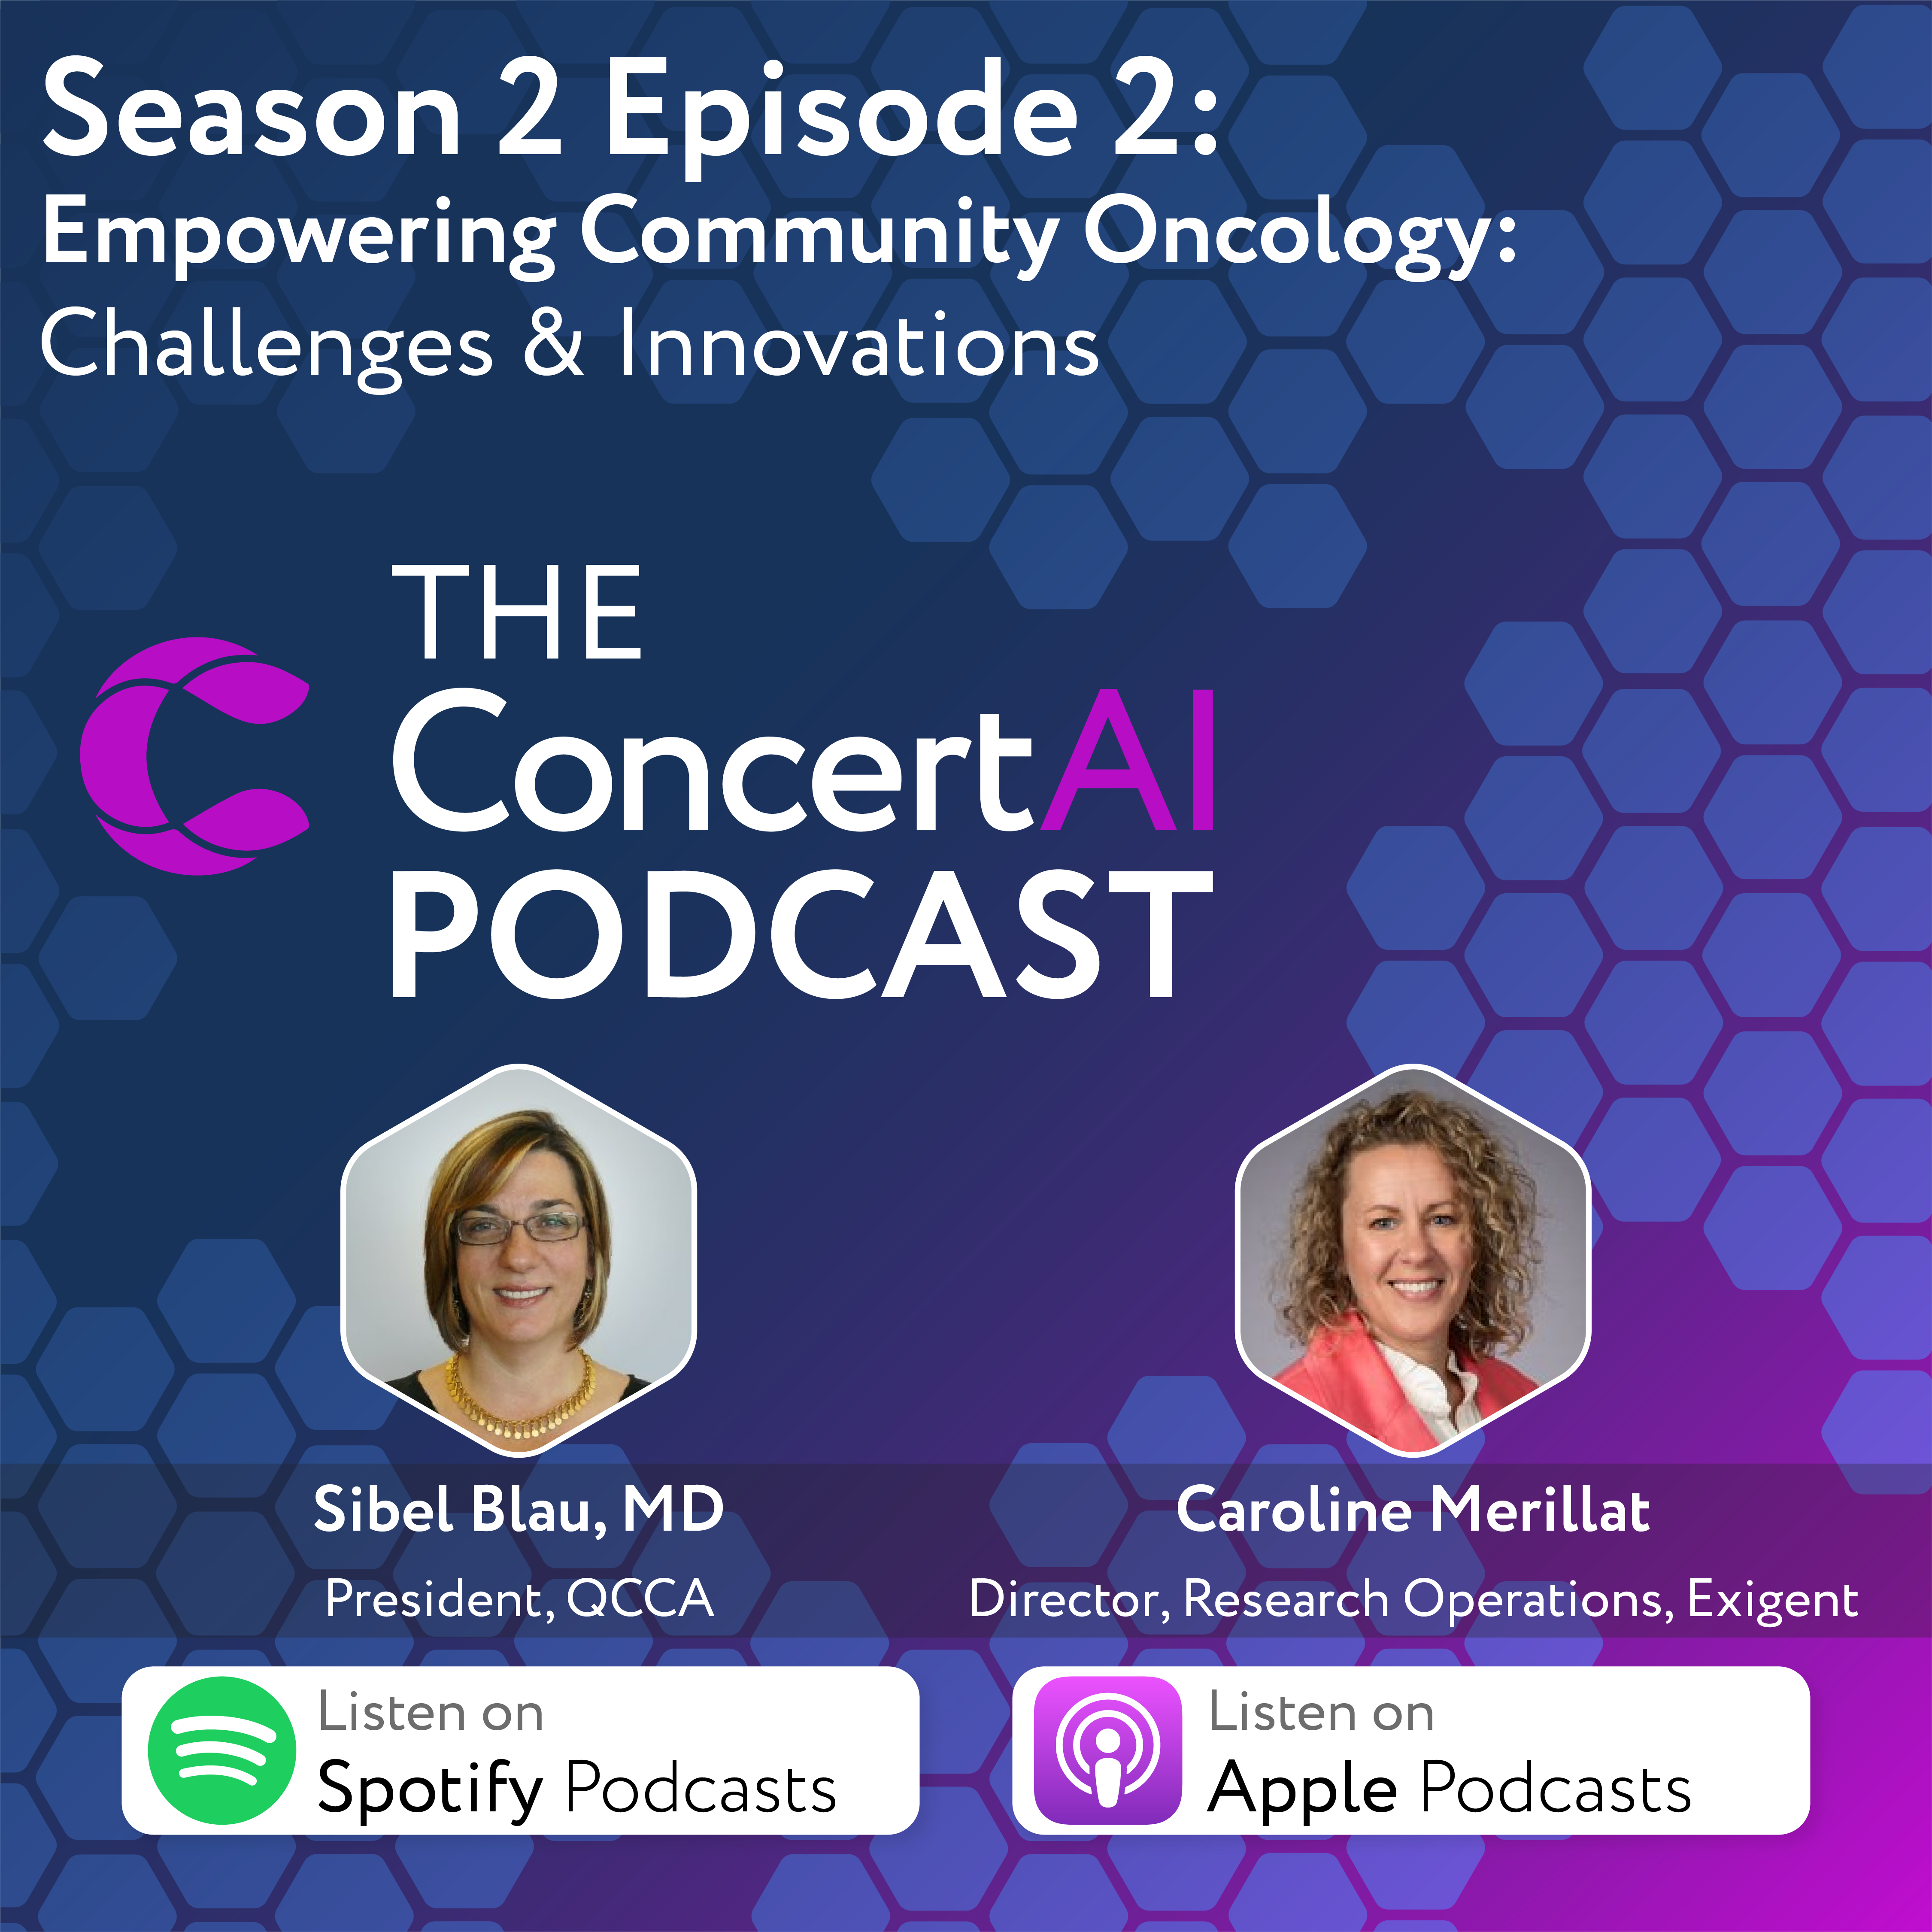 The ConcertAI Podcast | Empowering Community Oncology: Challenges & Innovations feat. Dr. Sibel Blau & Caroline Merillat